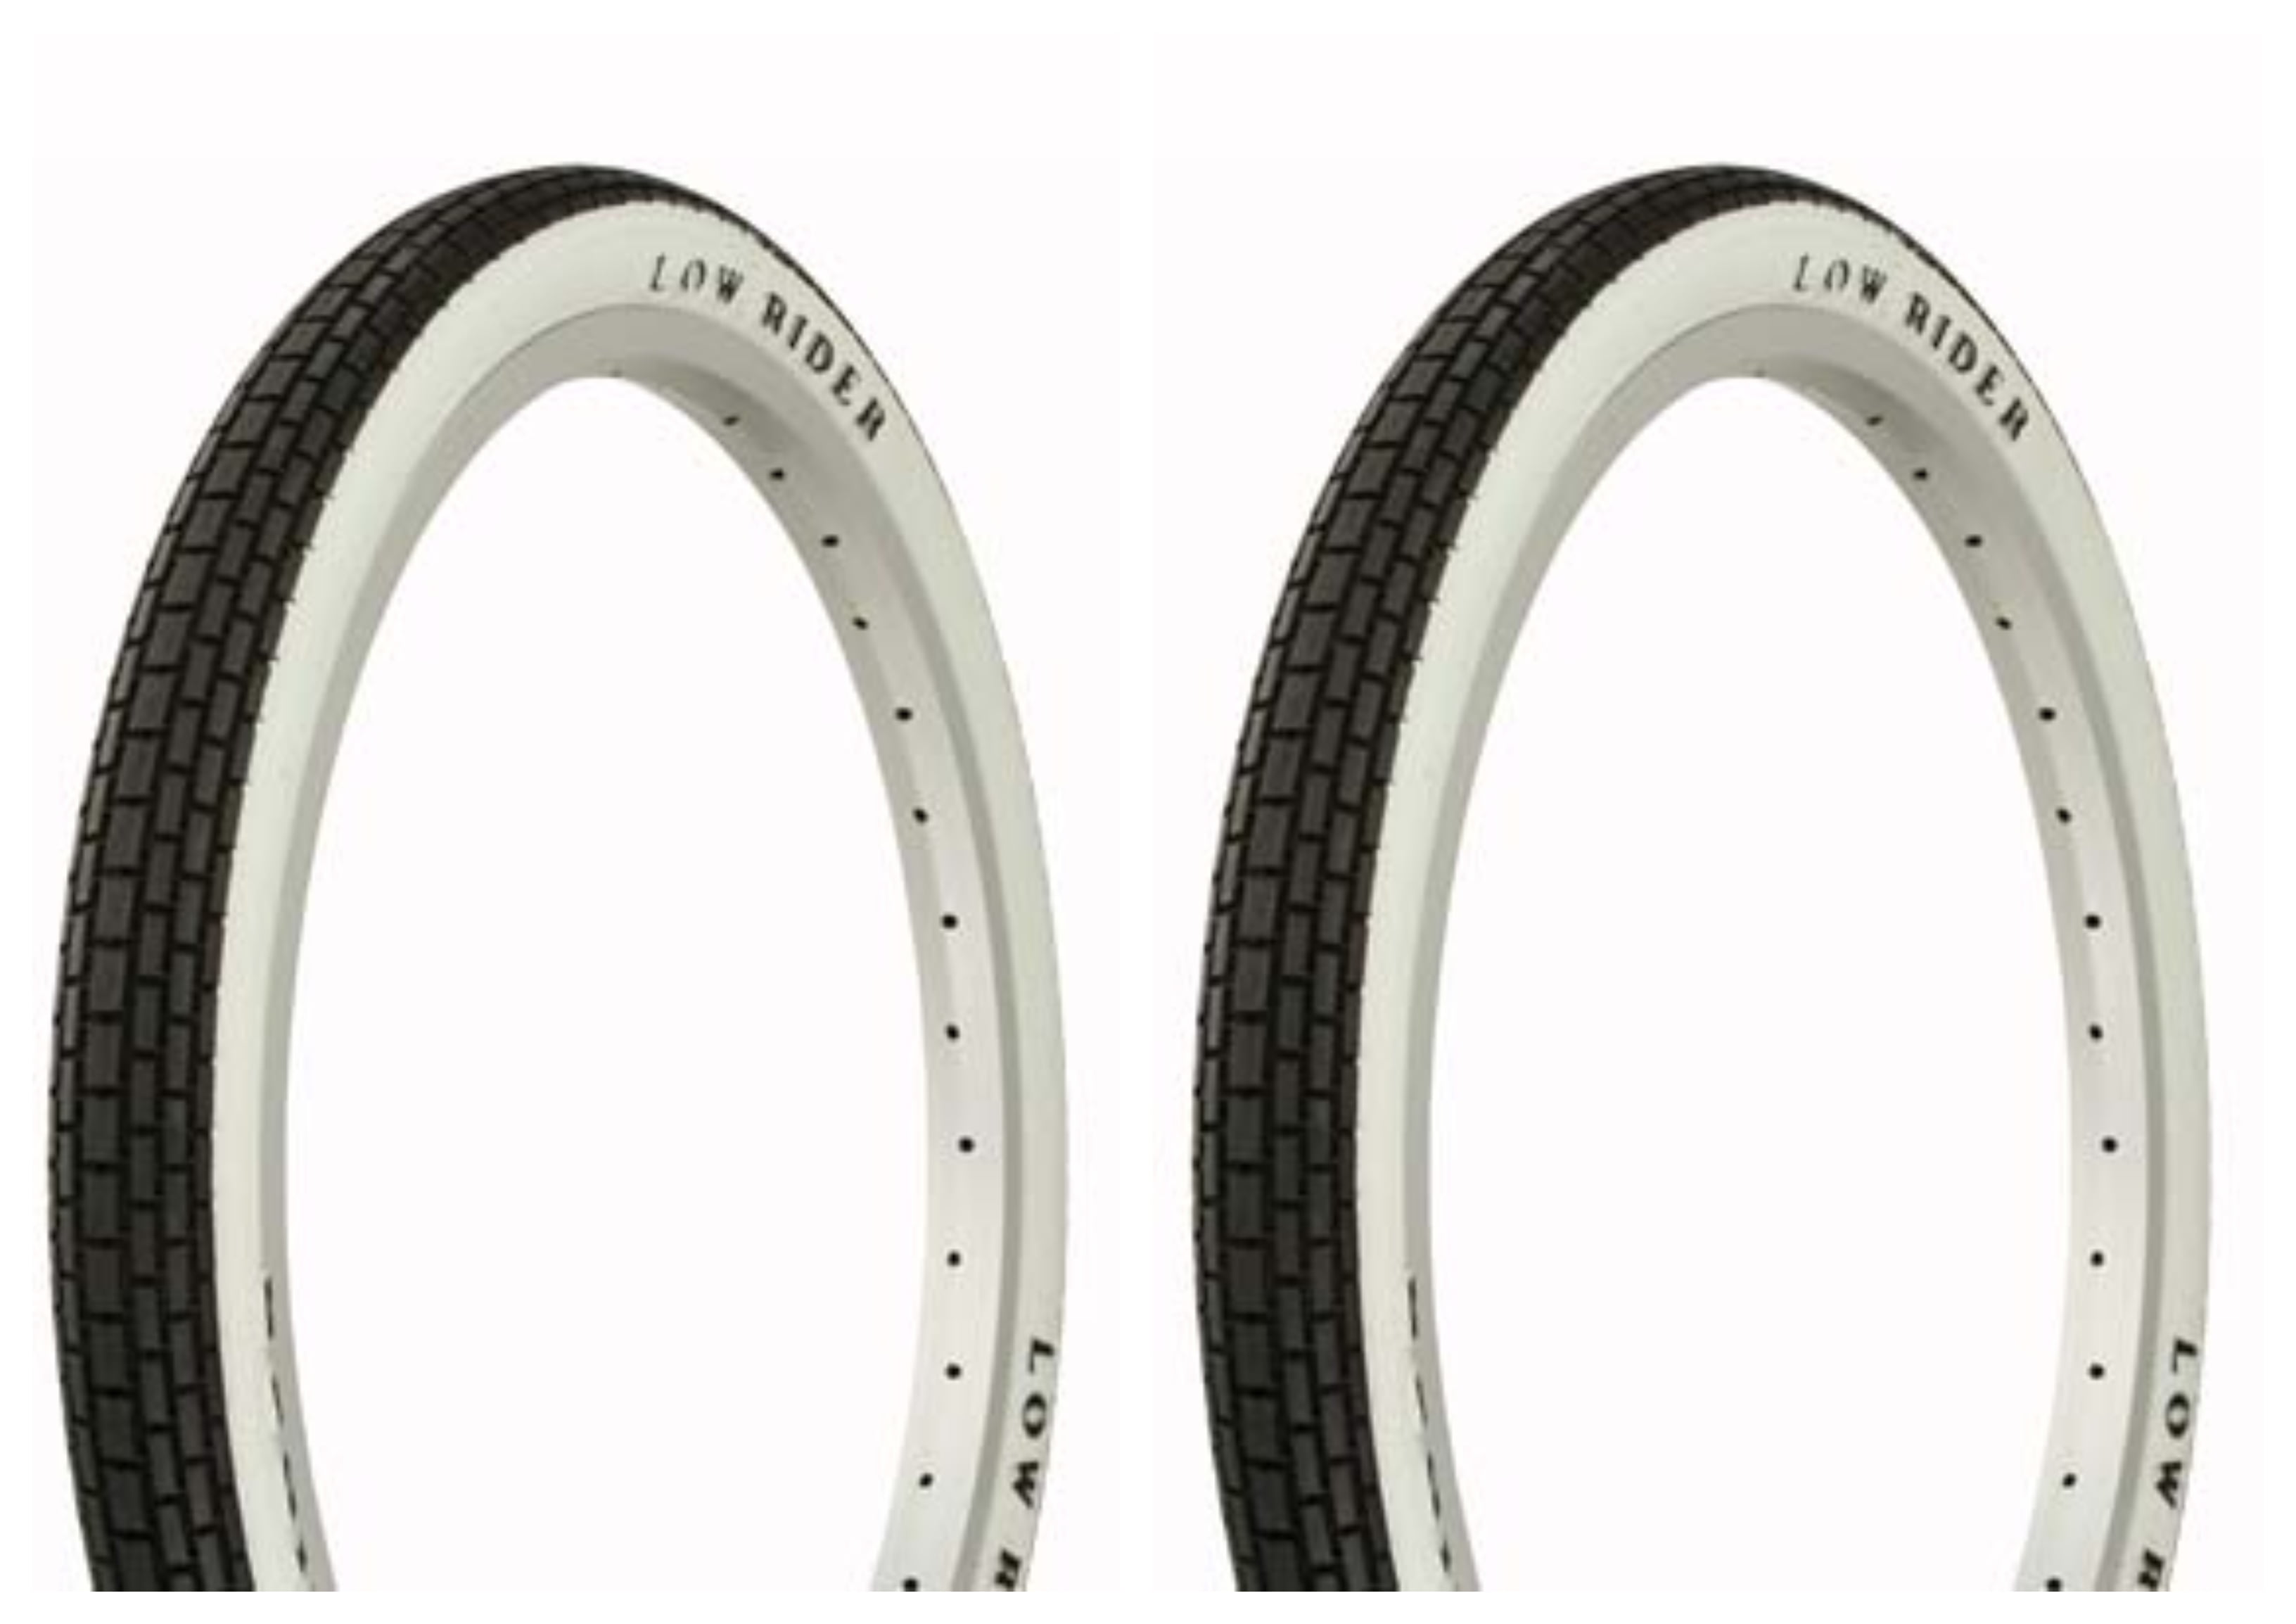 NEW ORIGINAL BICYCLE DURO TIRE IN 20 X 1.75 BLACK/BLACK SIDE WALL 120A. 